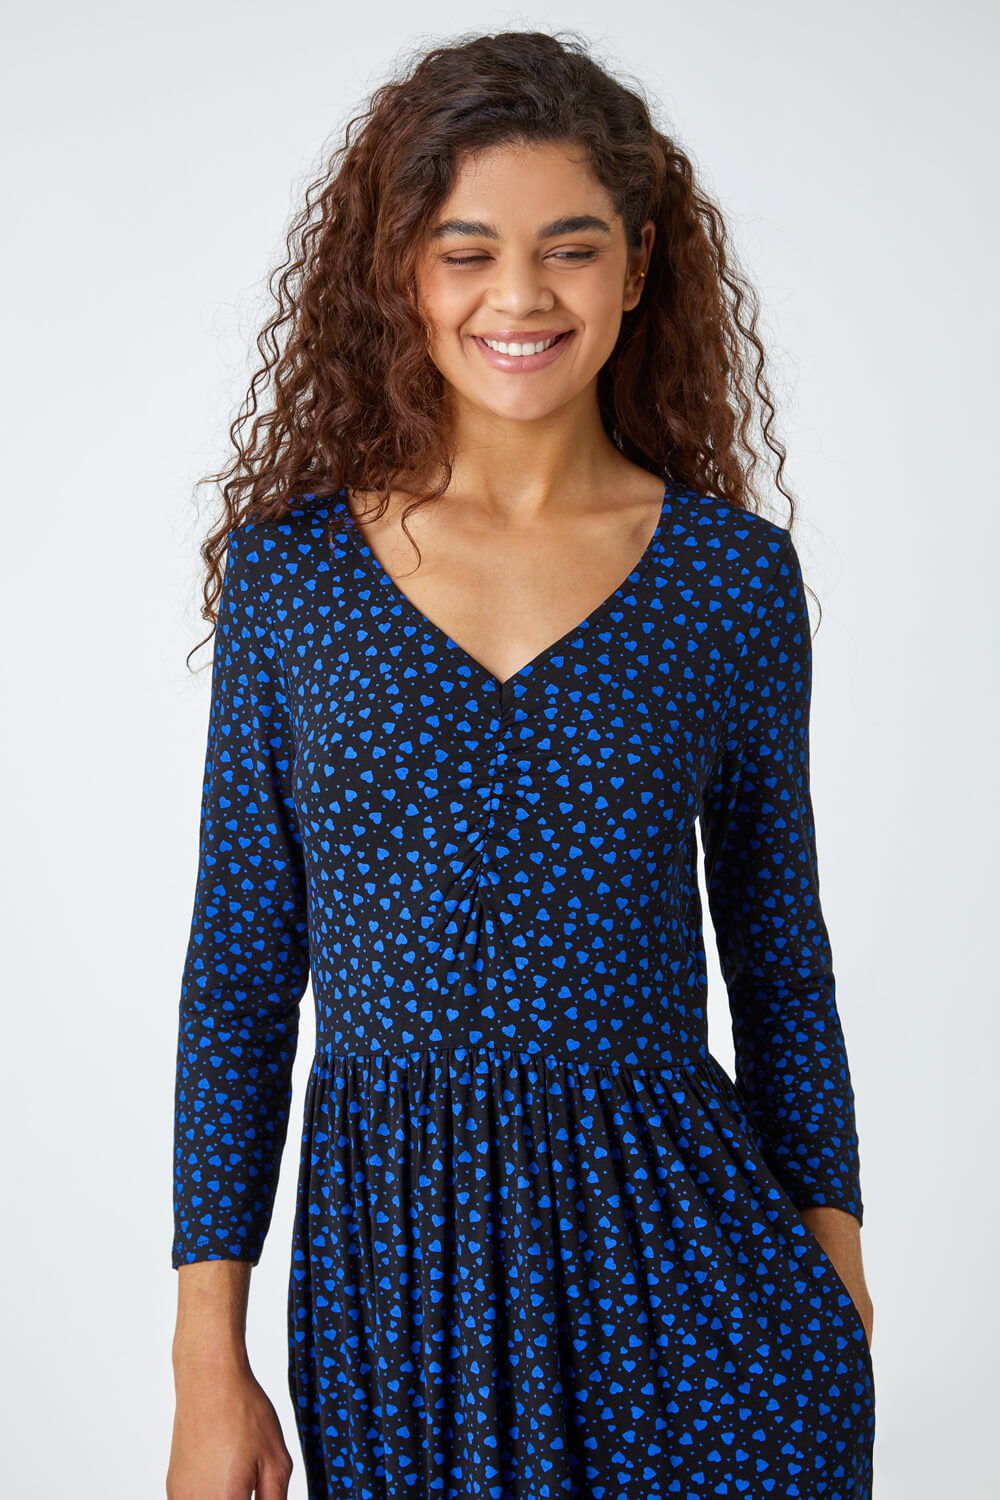 Royal Blue Heart Print Ruched Detail Stretch Midi Dress, Image 4 of 5